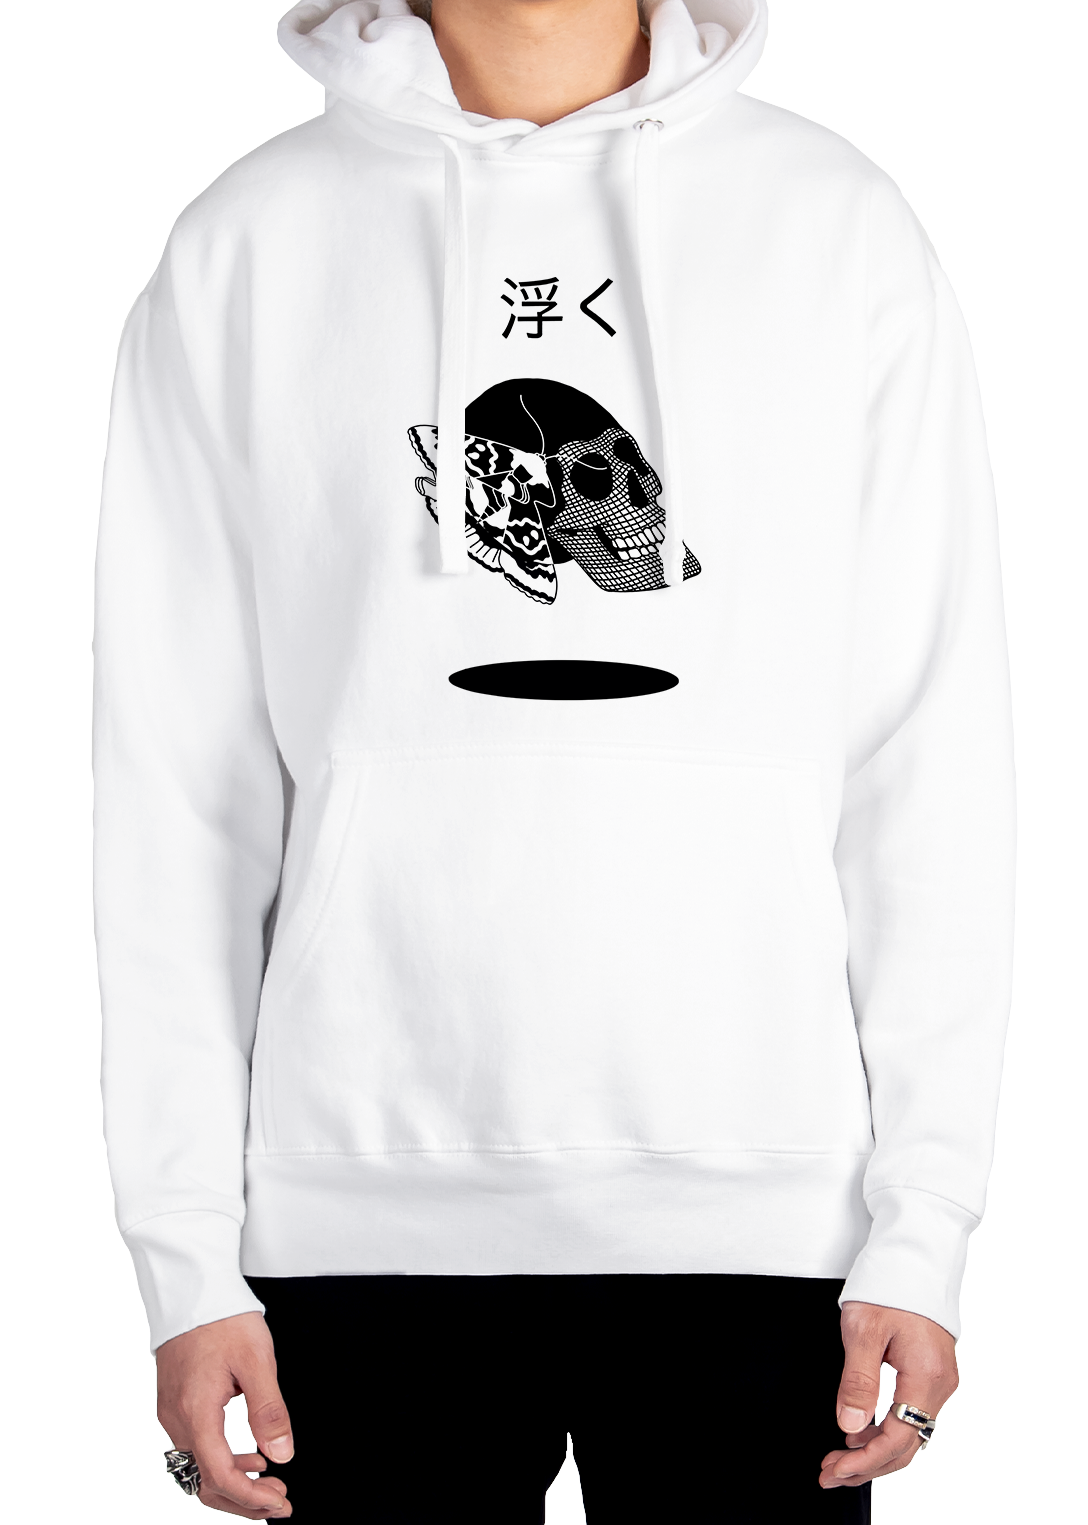 Experience the Vaporwave fashion with Vapor95's Graphic Hoodies ...